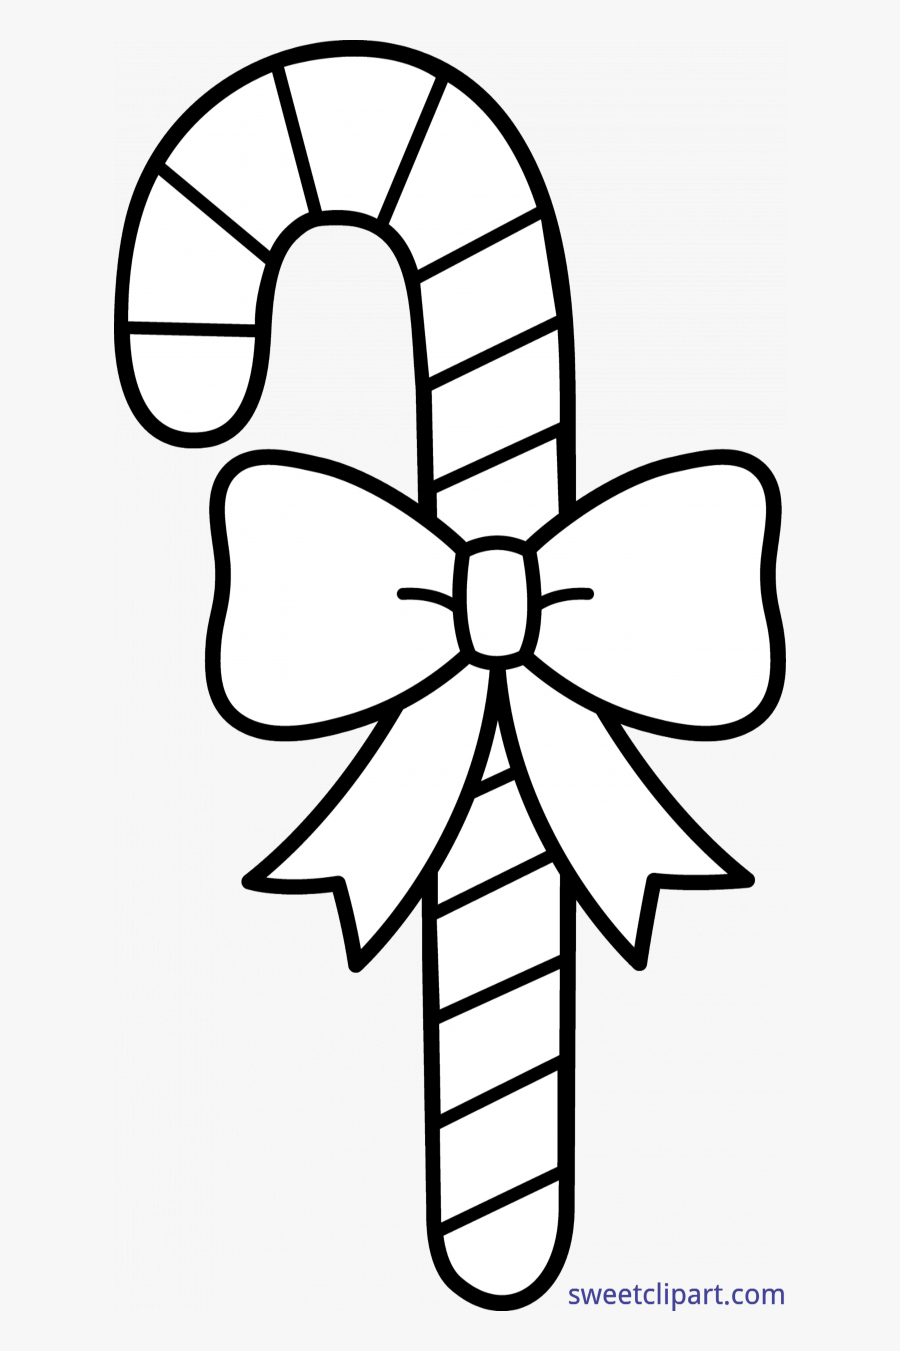 Candy Canes Black And White, Transparent Clipart